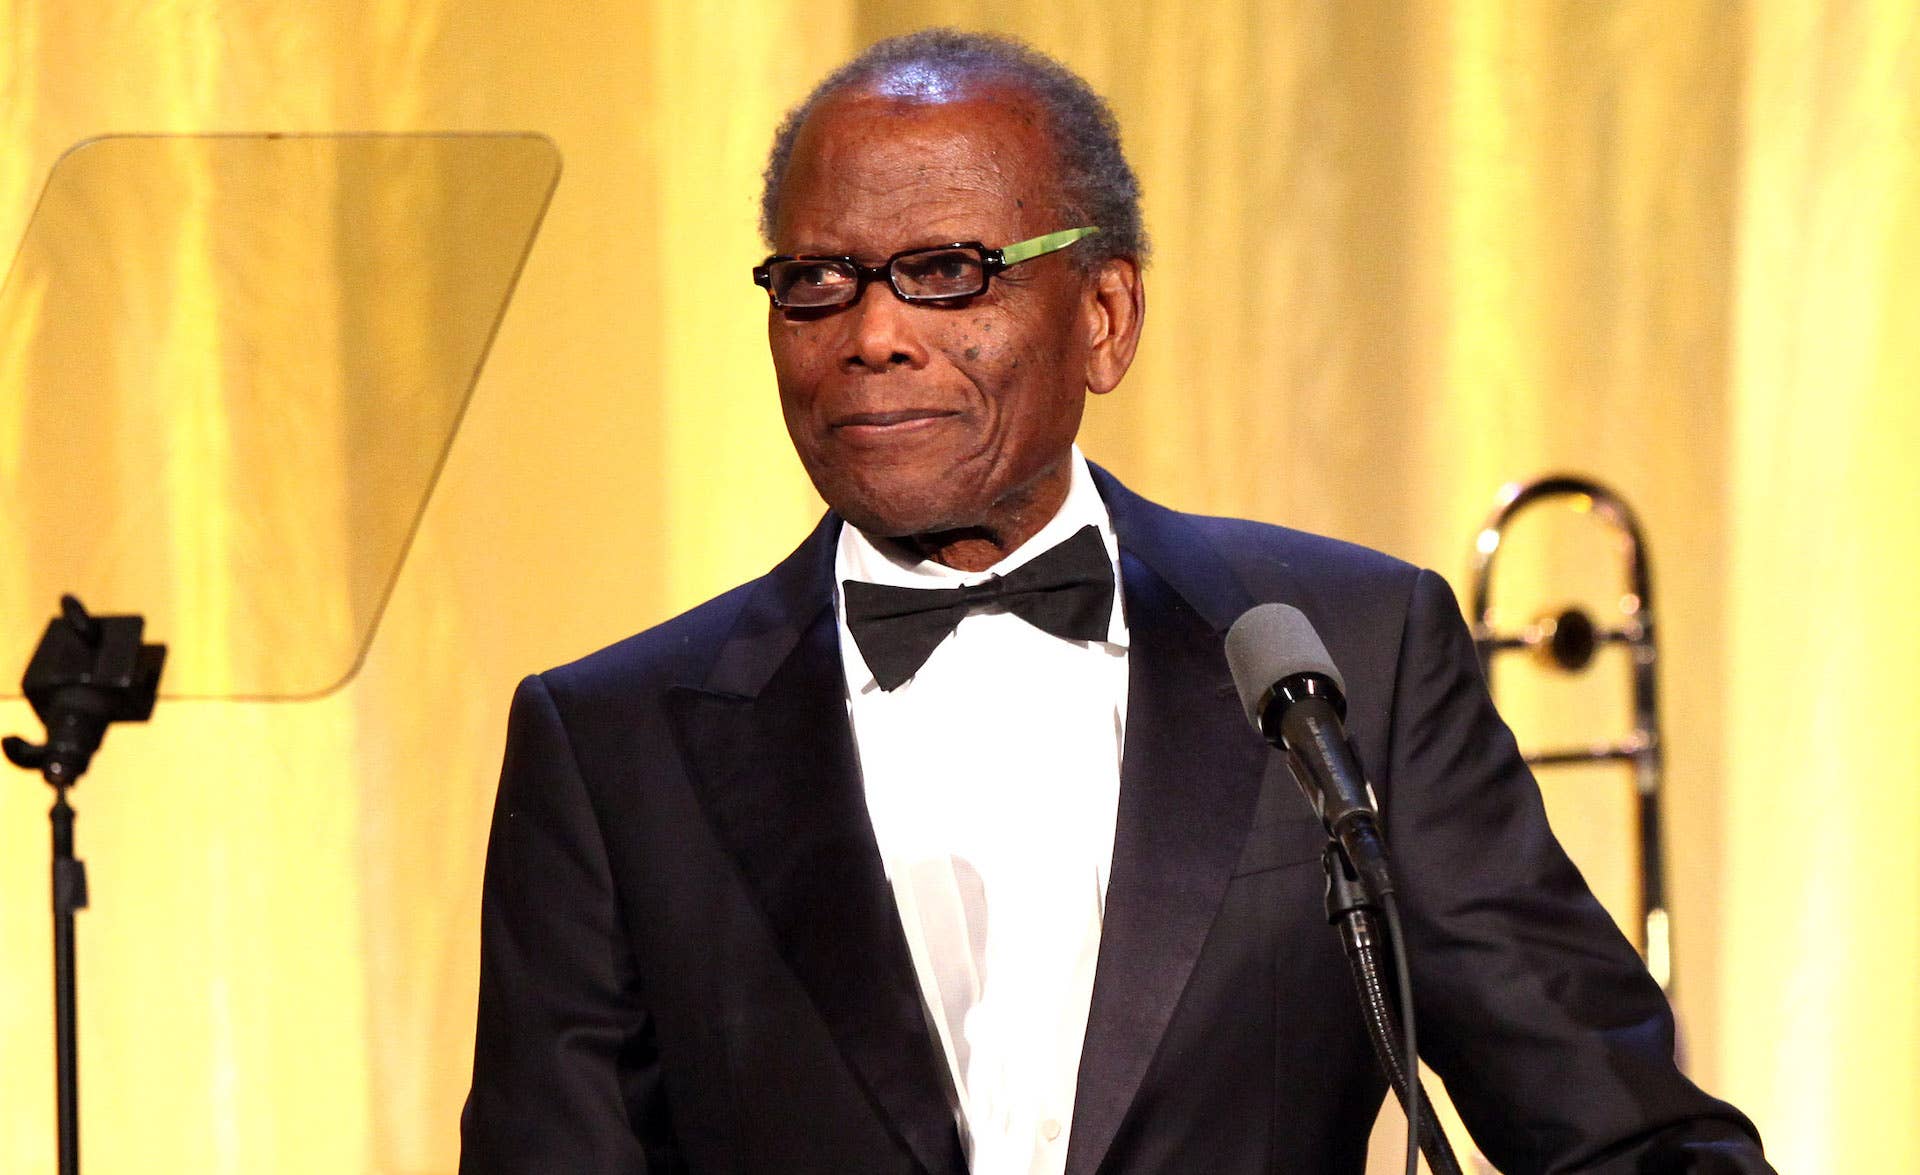 Sidney Poitier onstage in glasses